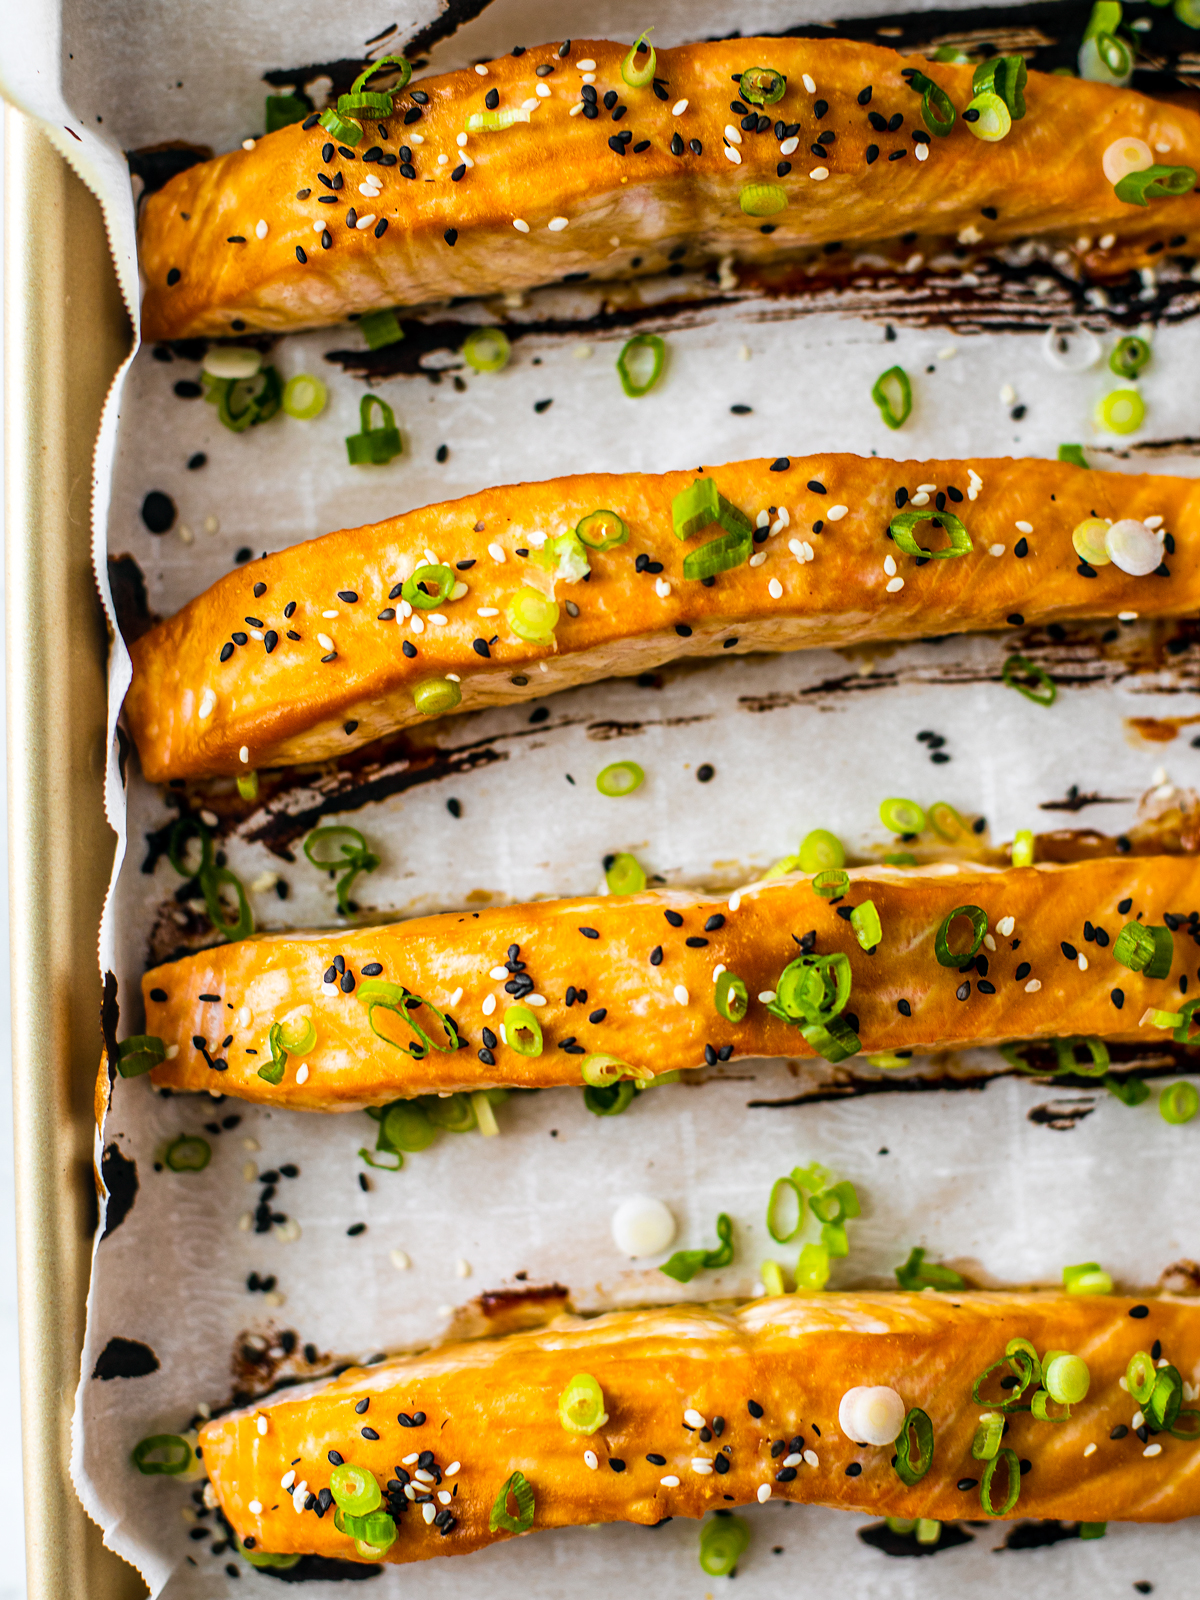 Four salmon filets on a baking sheet with parchment, glazed and garnished with sesame seeds and scallions.